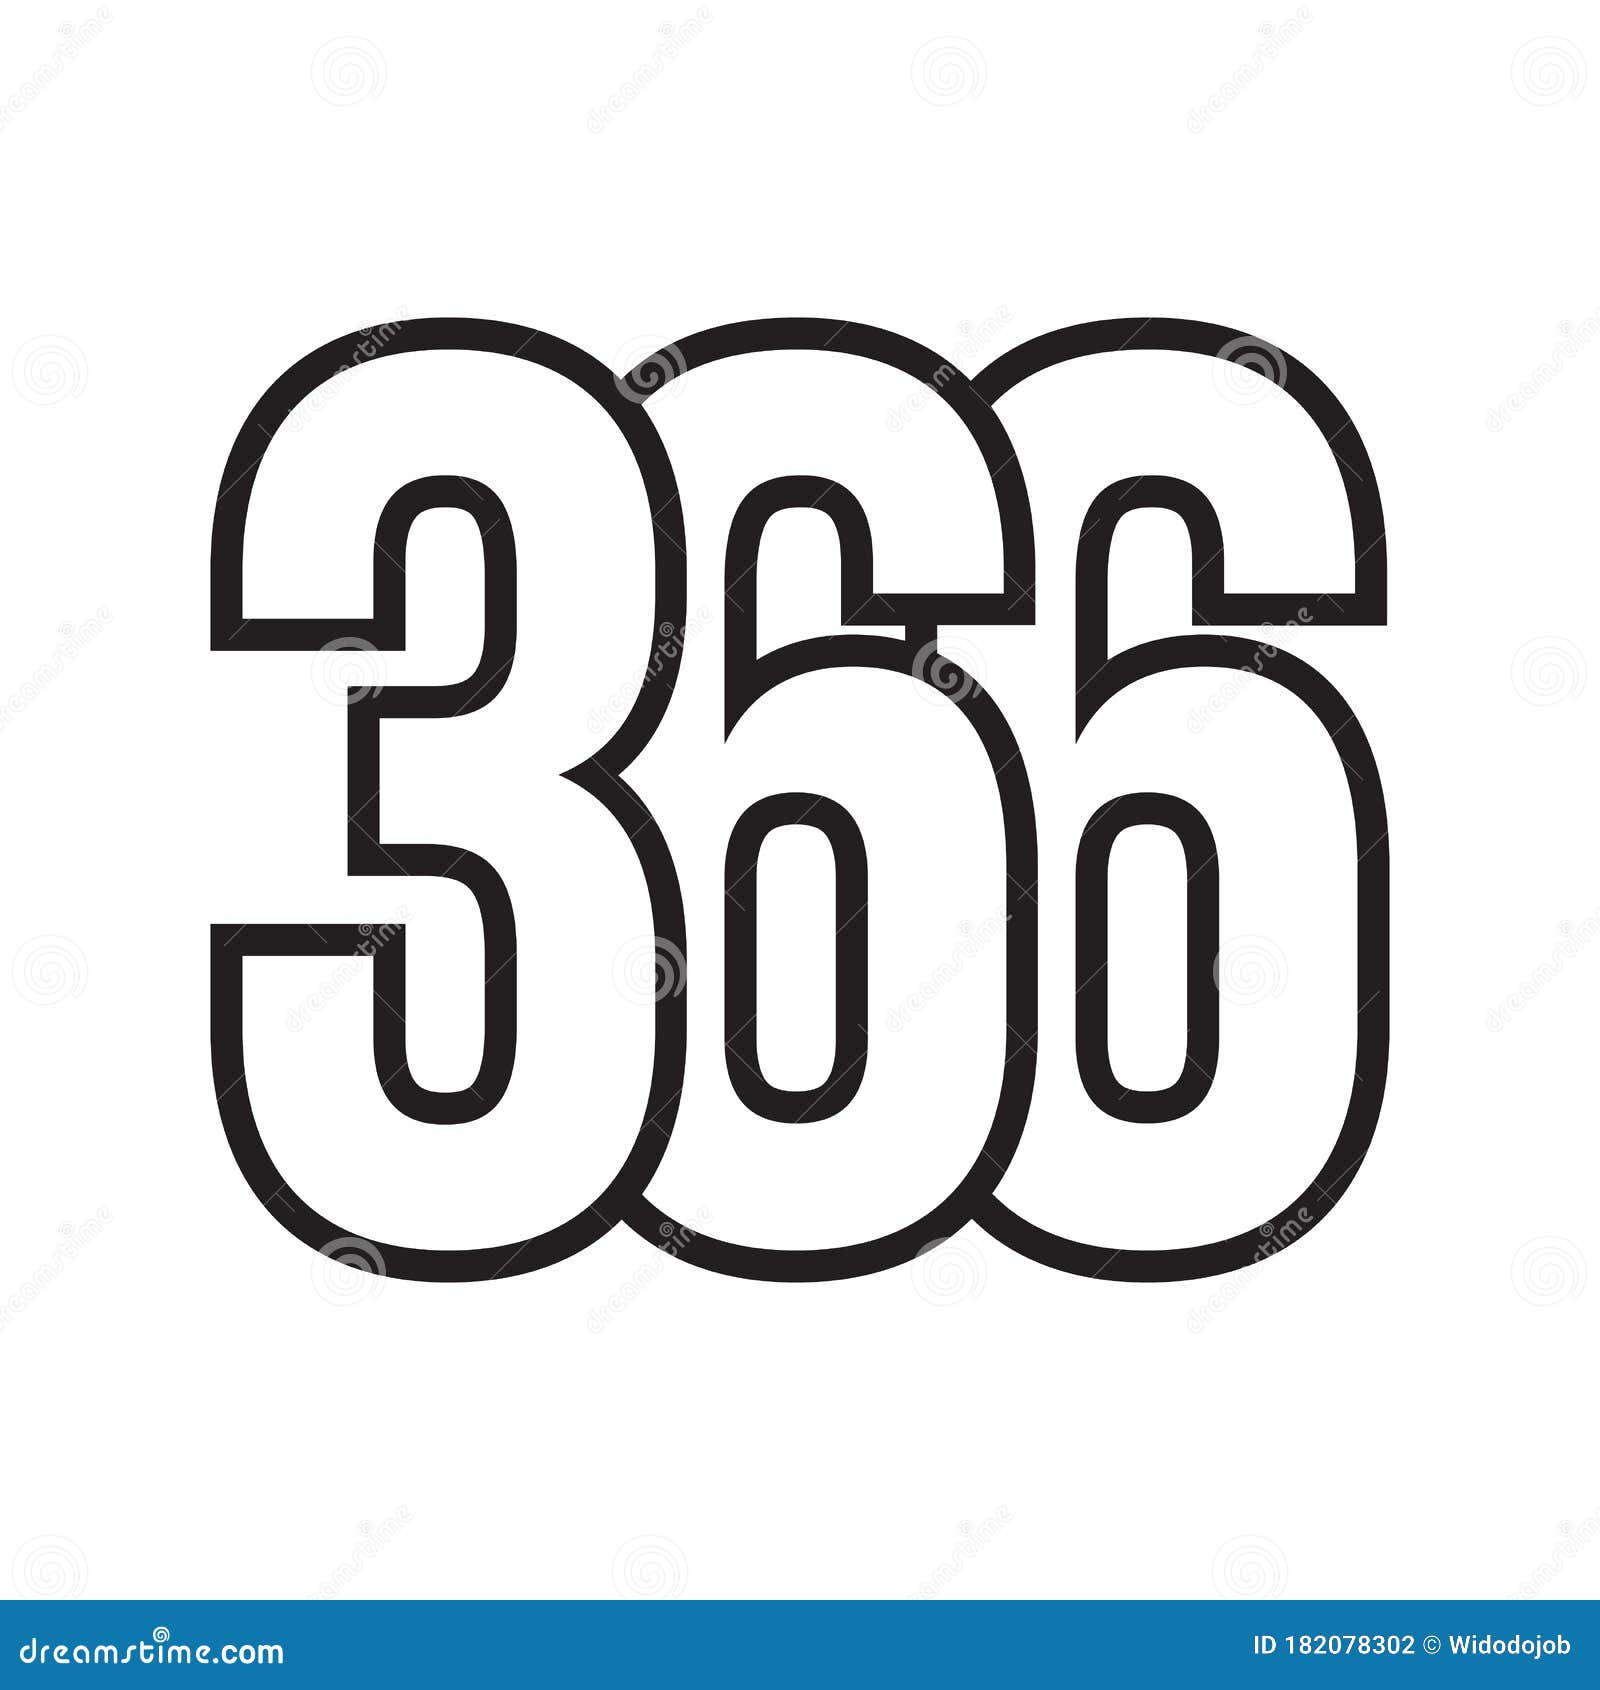 366 Day. Leap Year 2024 Design Vector Stock Vector Illustration of